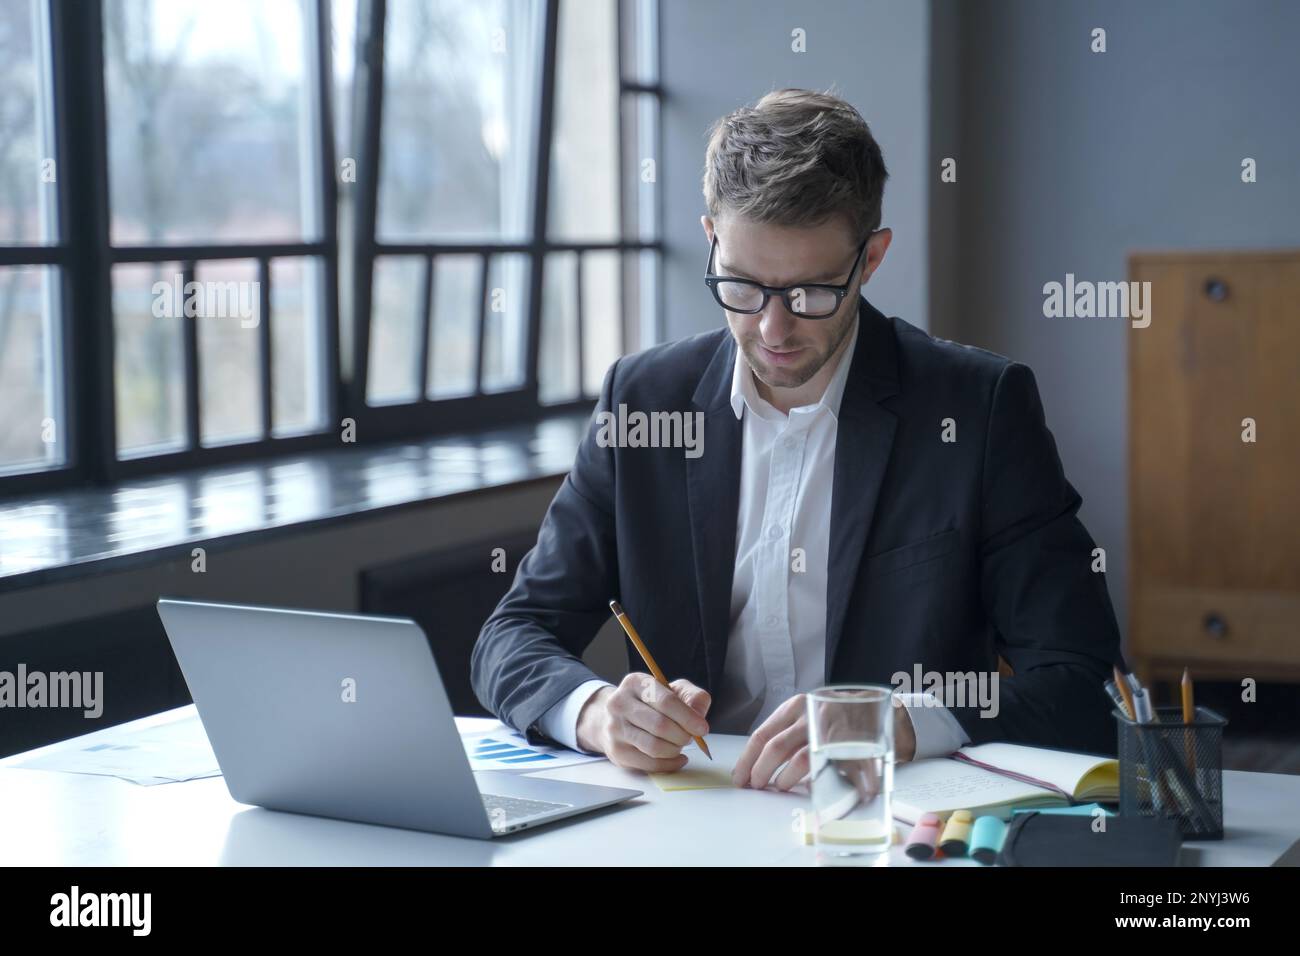 Immersed in work. Focused young German male banker writes down memos on sticky notes to remember important details to share for upcoming online meetin Stock Photo